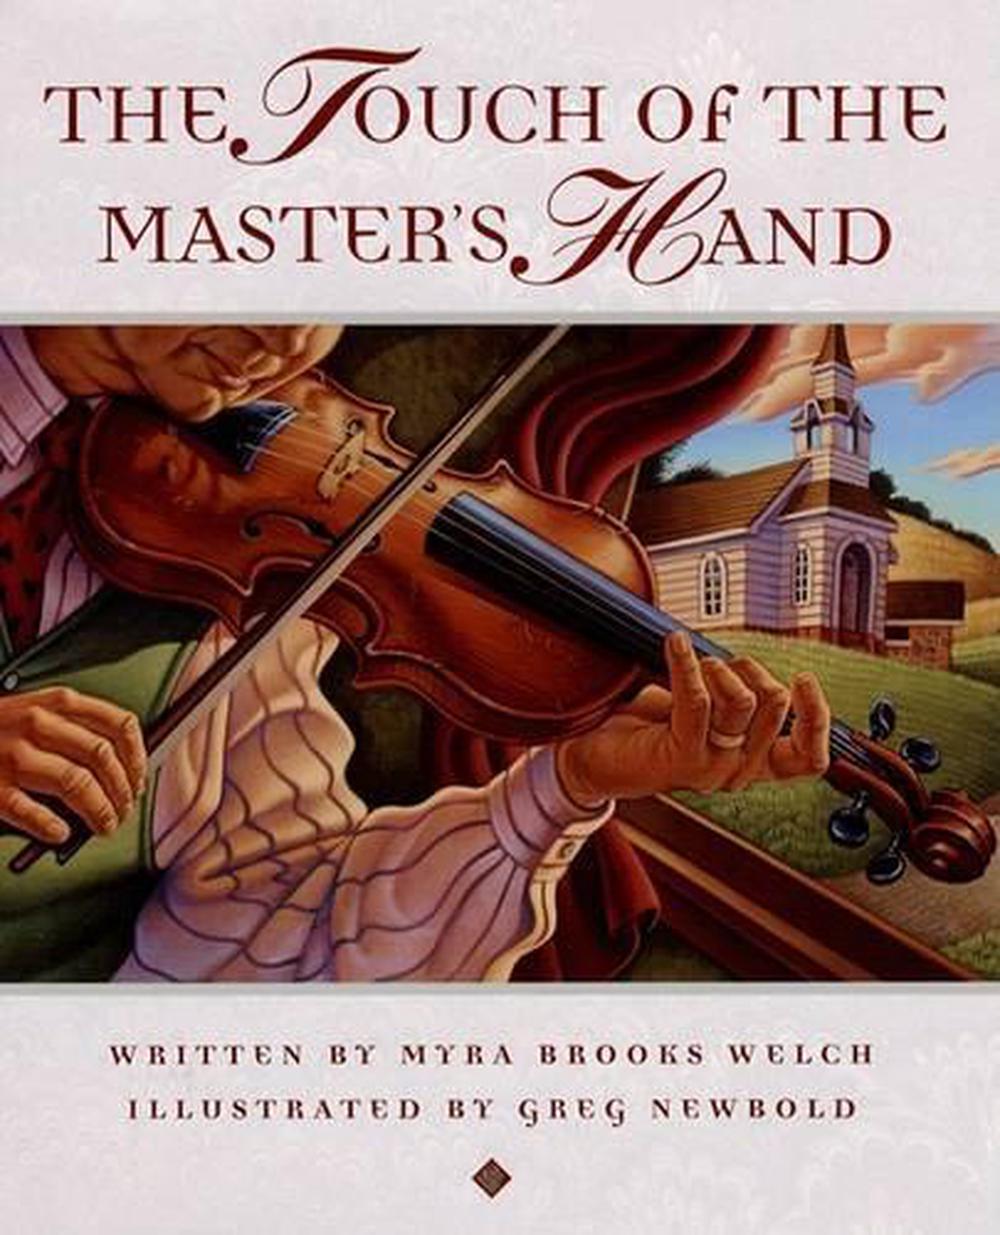 The Touch of the Master's Hand by Myra Brooks Welch (English) Hardcover